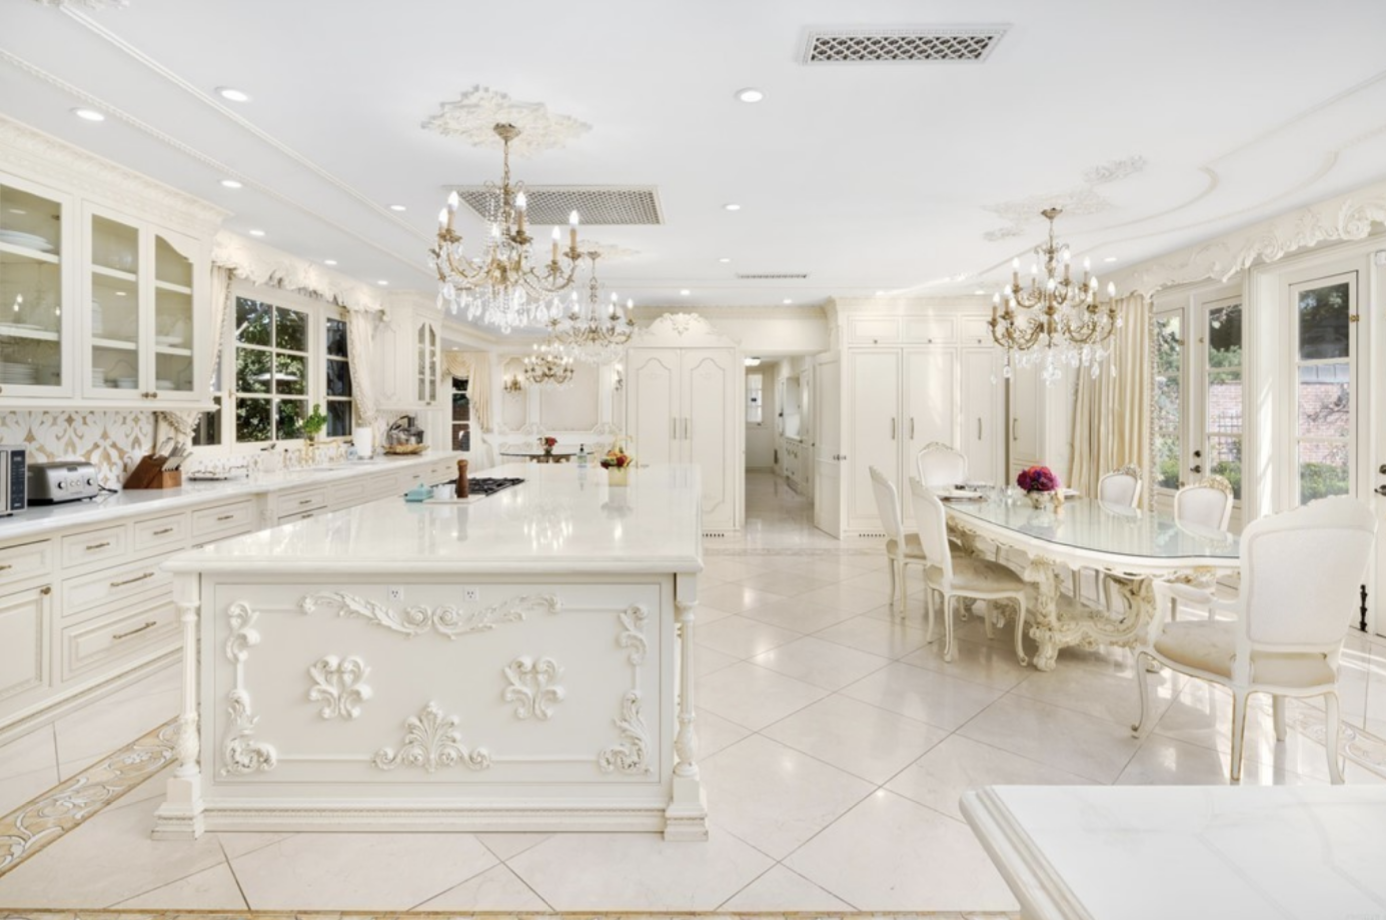 Bright cream colored kitchen with chandeliers